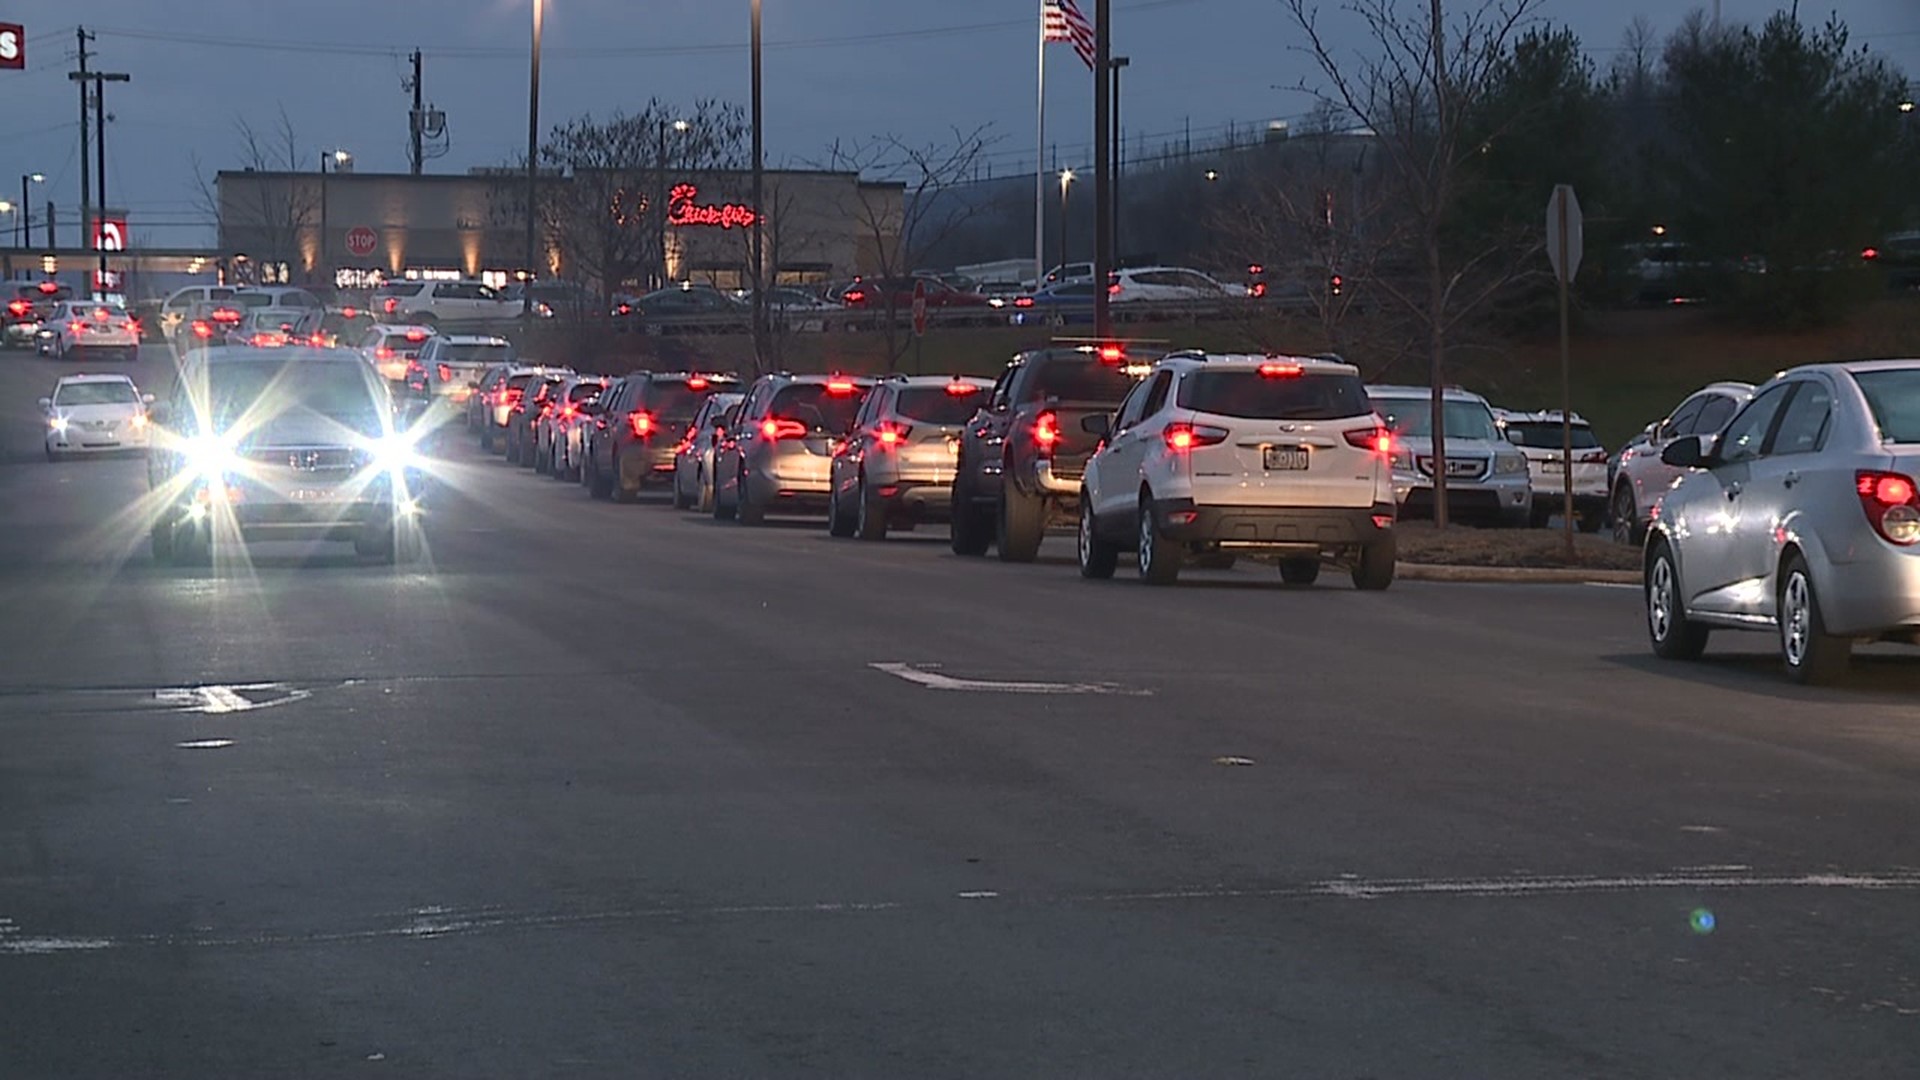 Tensions flared as traffic backed up in both directions on Commerce Boulevard.